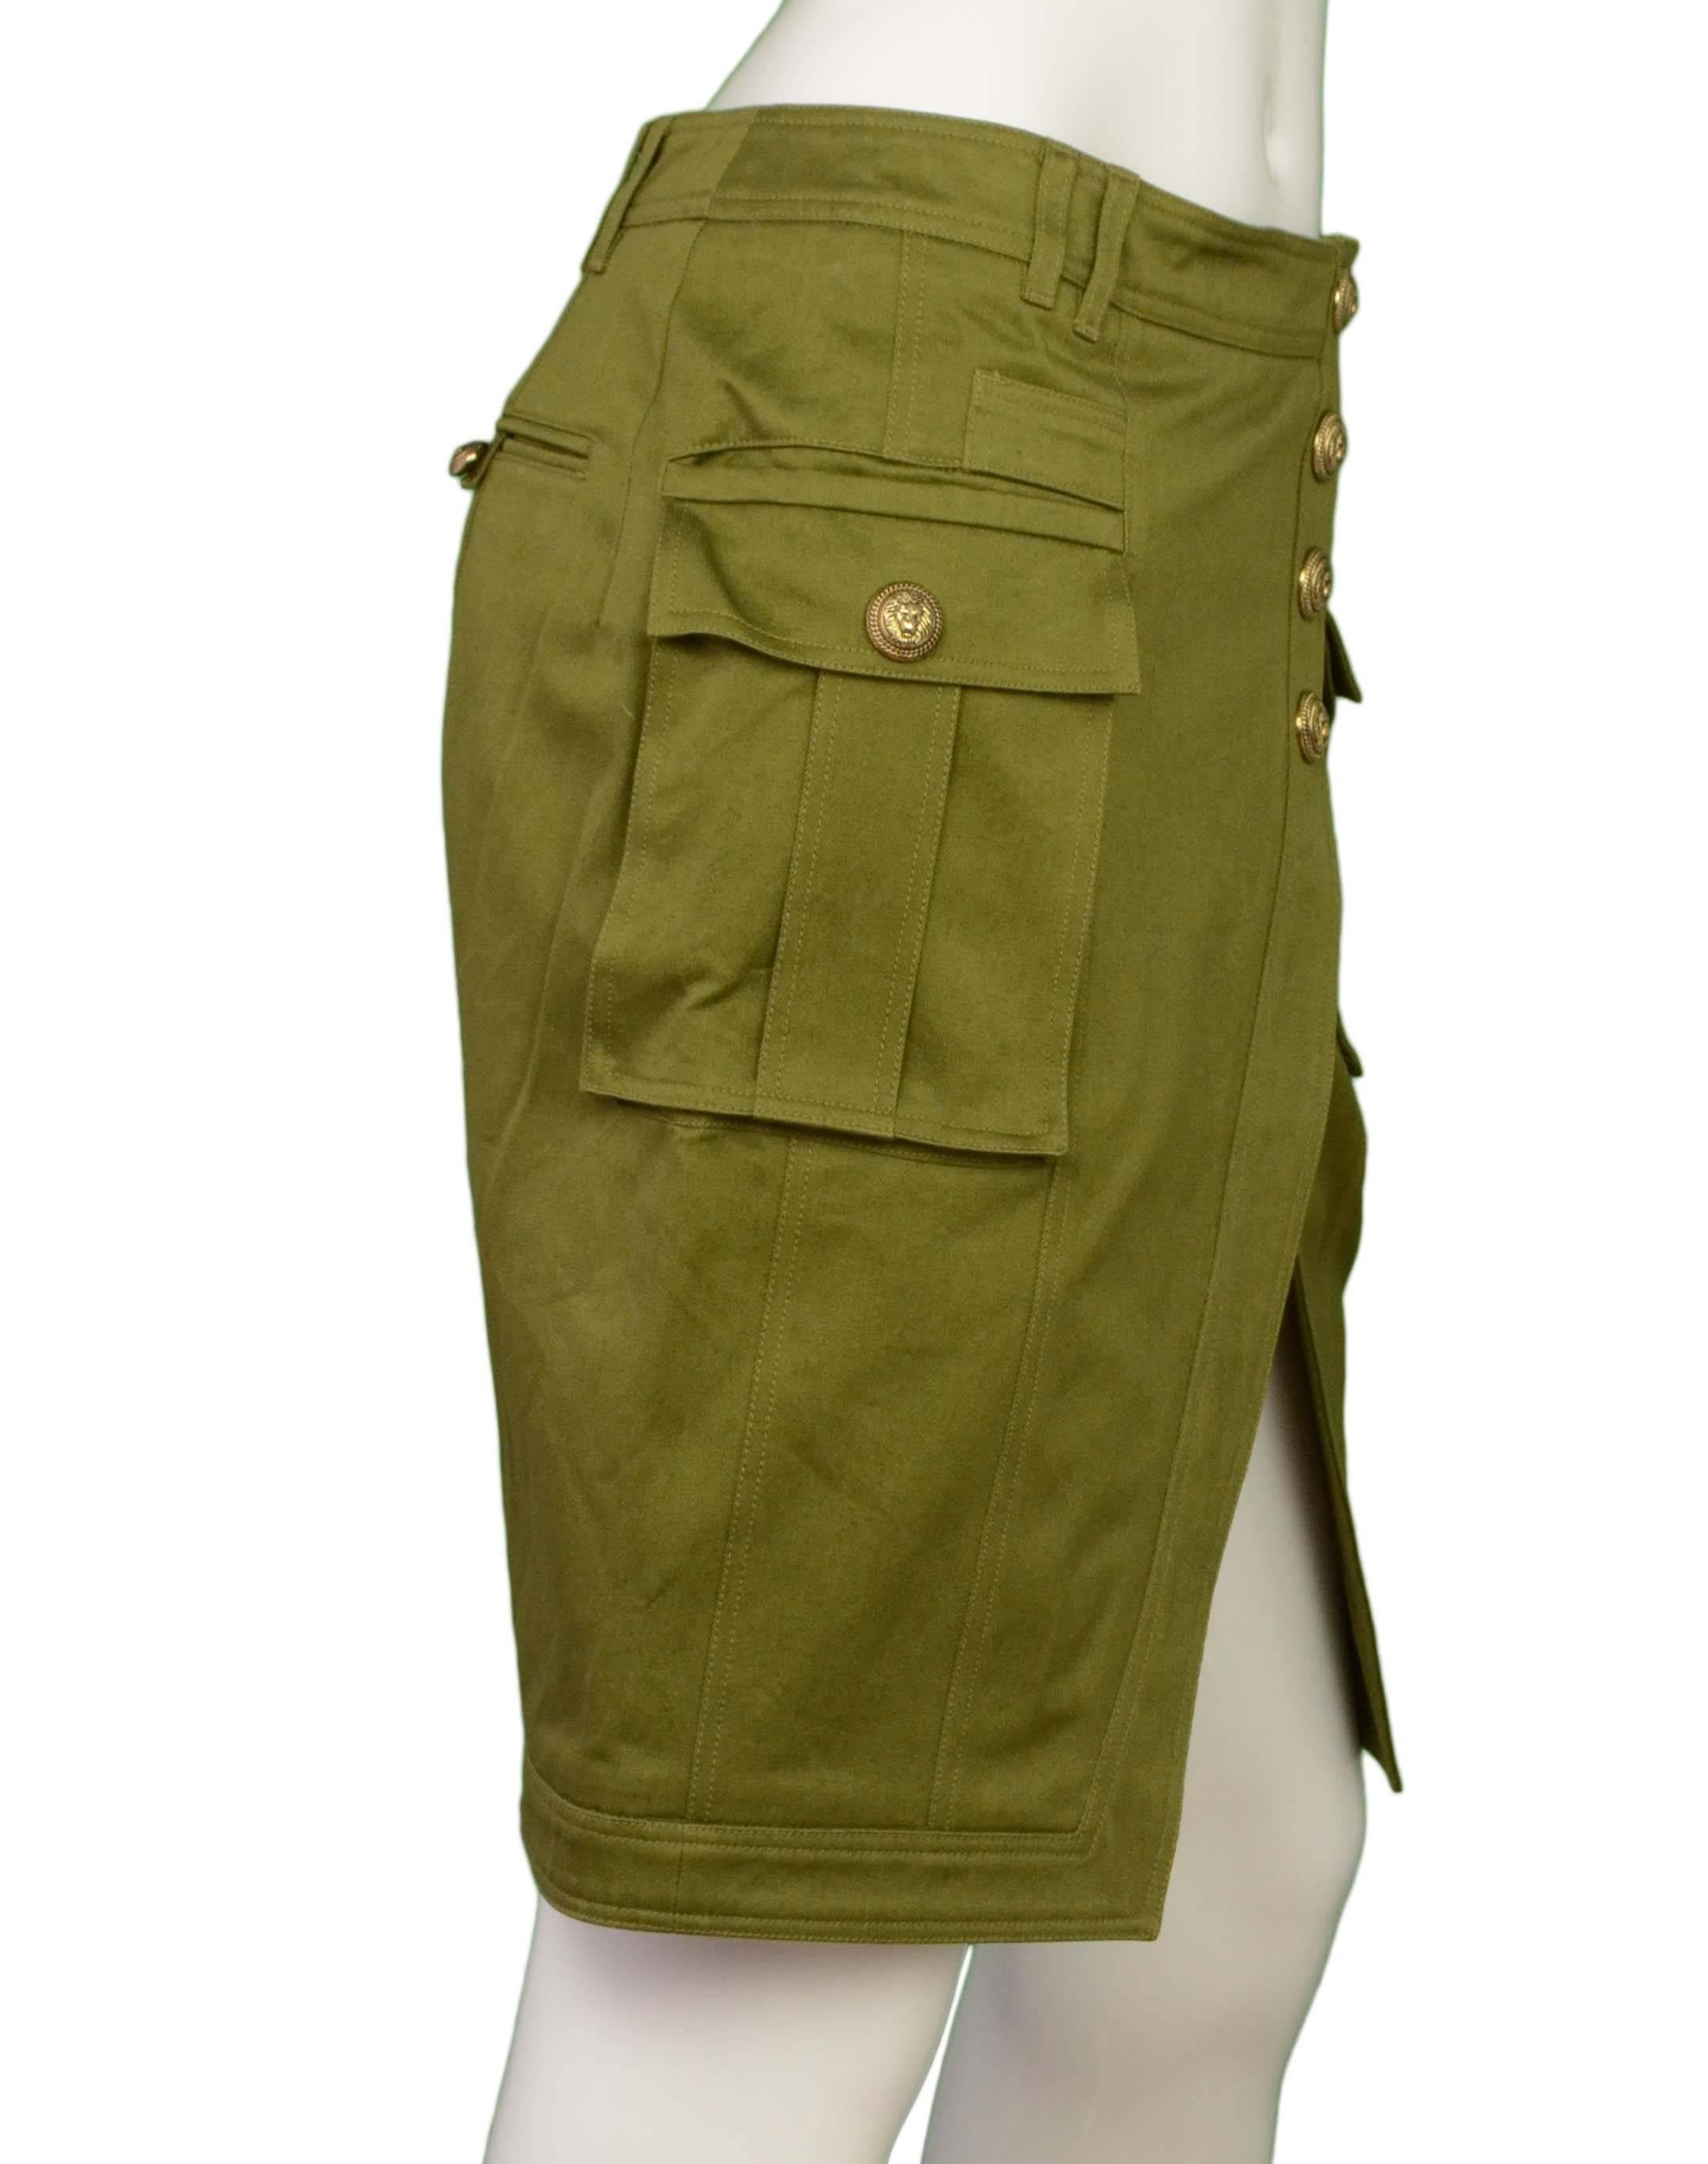 Balmain Olive Green Cotton Cargo Skirt 
Features large gold buttons with lion's head detailing
Made In: European Union
Color: Olive green
Composition: 100% cotton
Lining: None
Closure/Opening: Back center zipper
Exterior Pockets: Two cargo